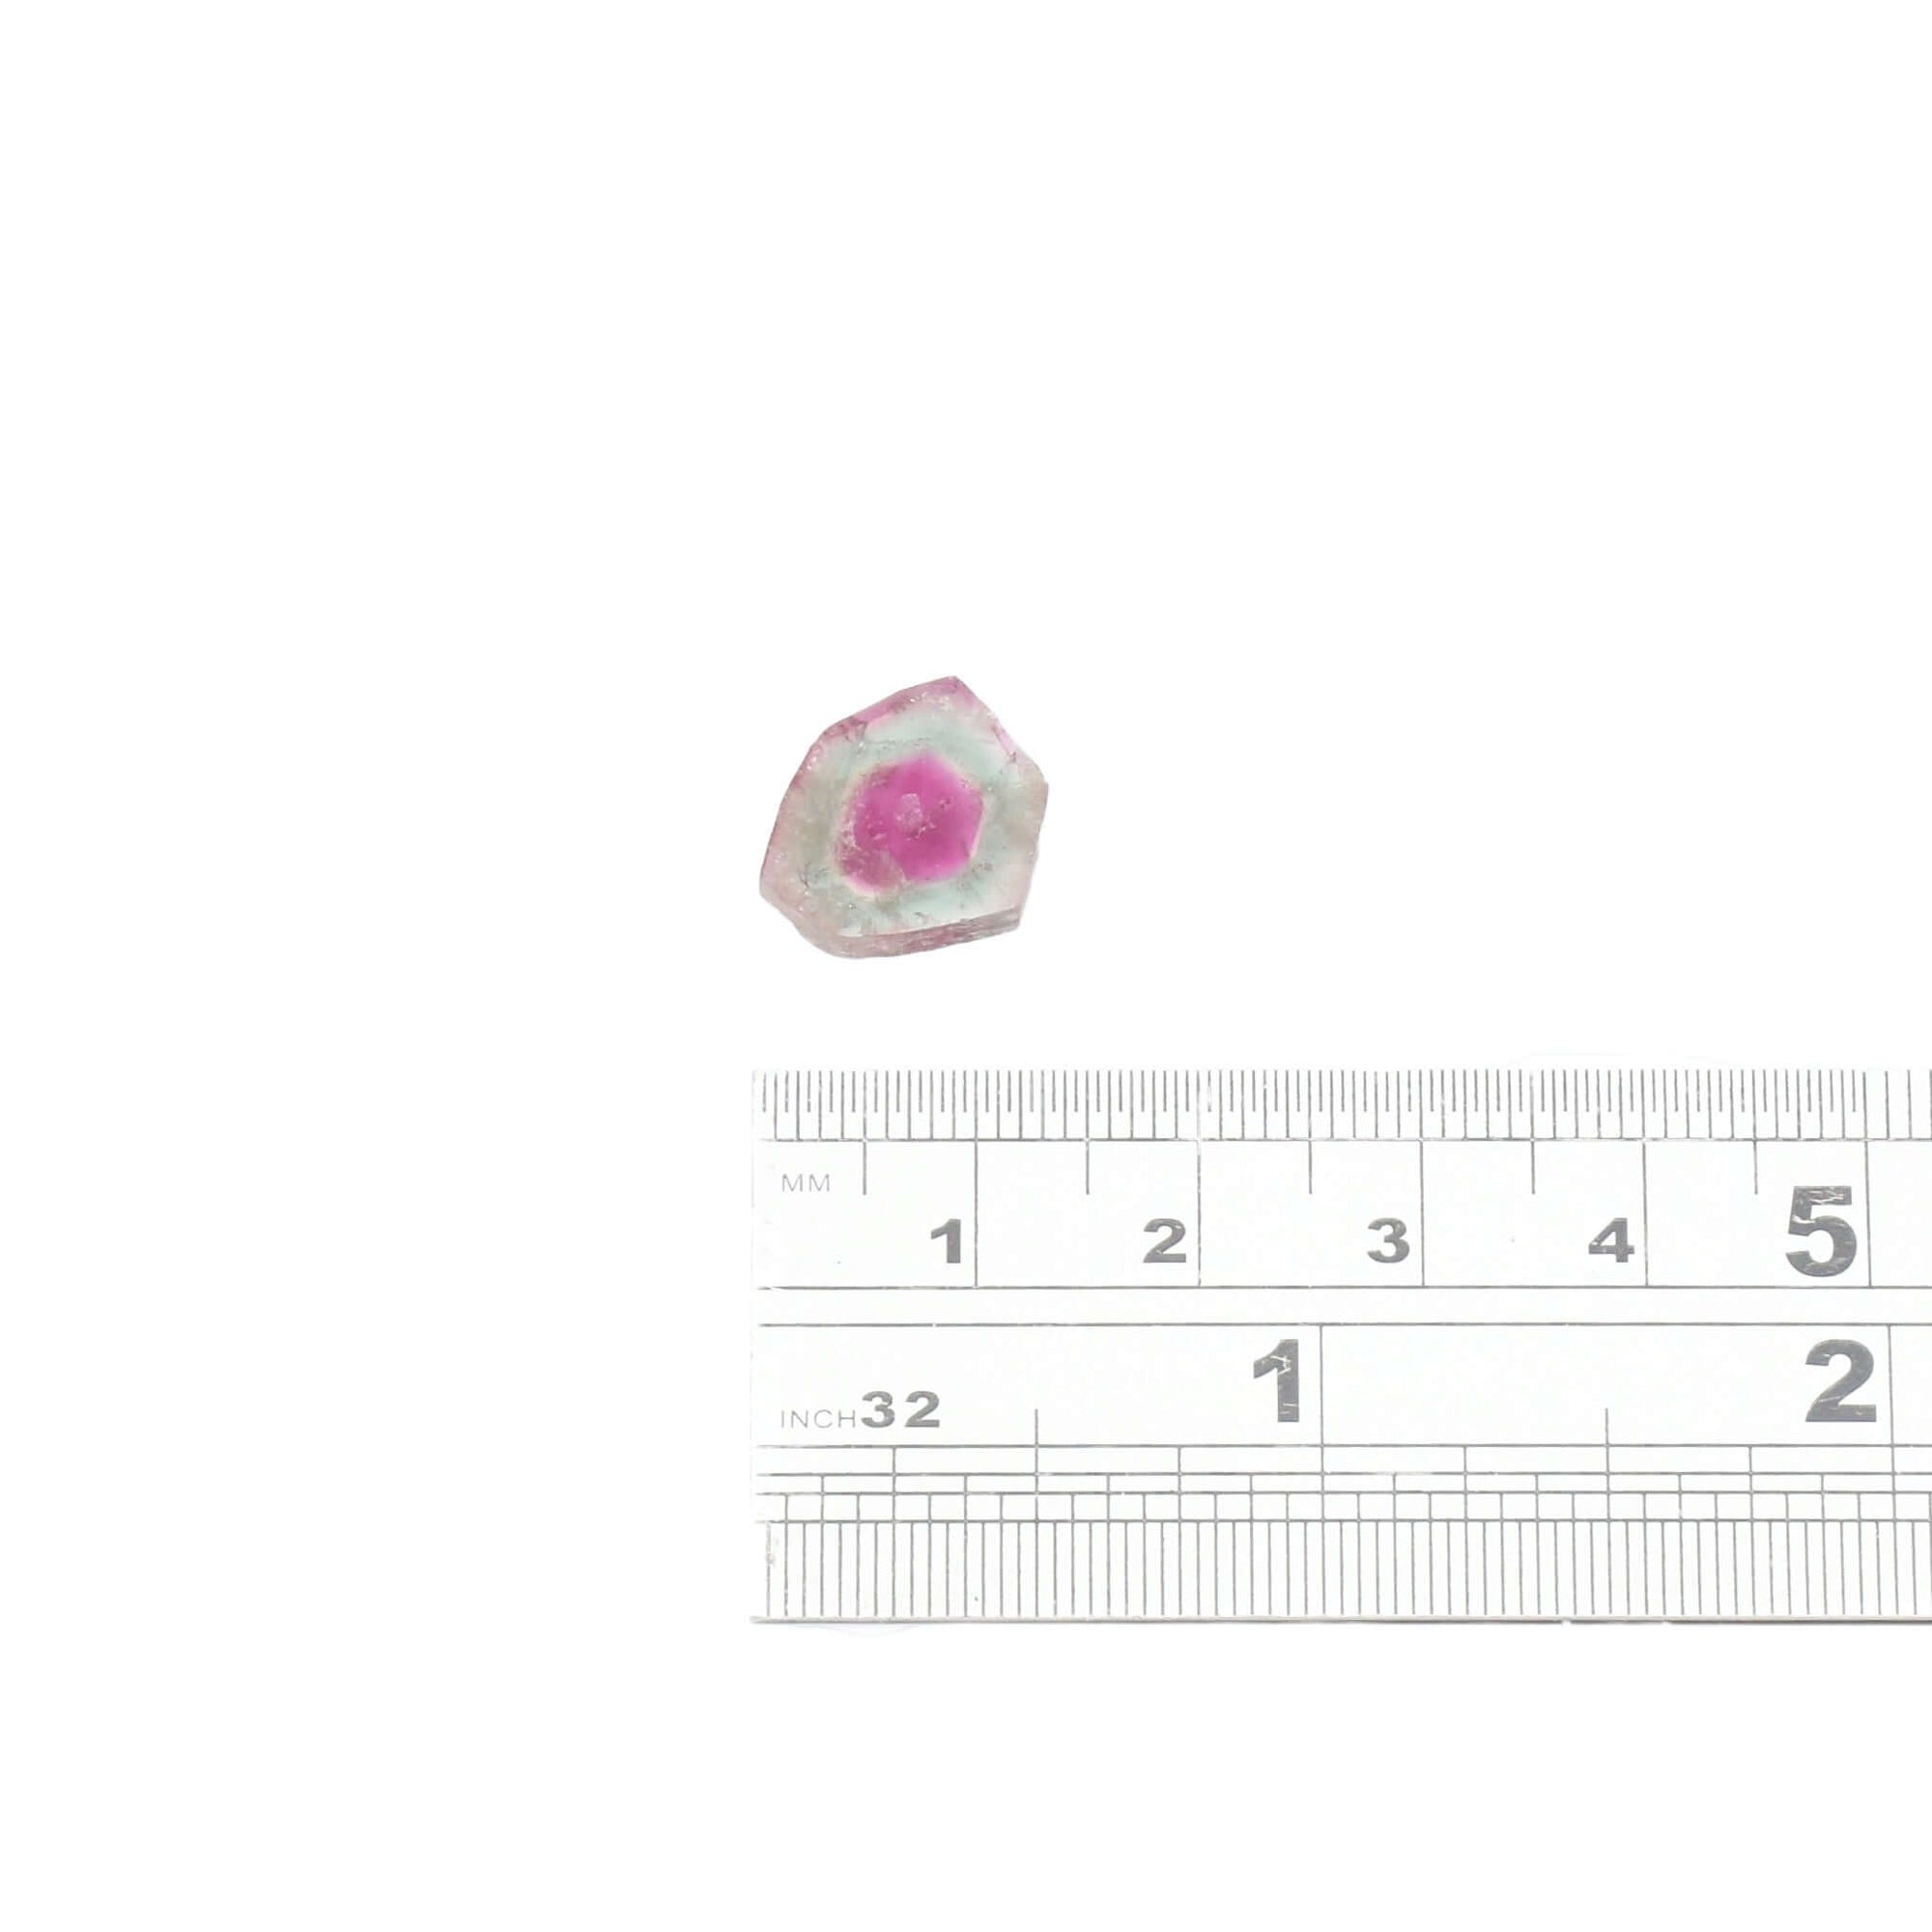 This pale green and pink slice is a favorite of my watermelon tourmaline loose stones